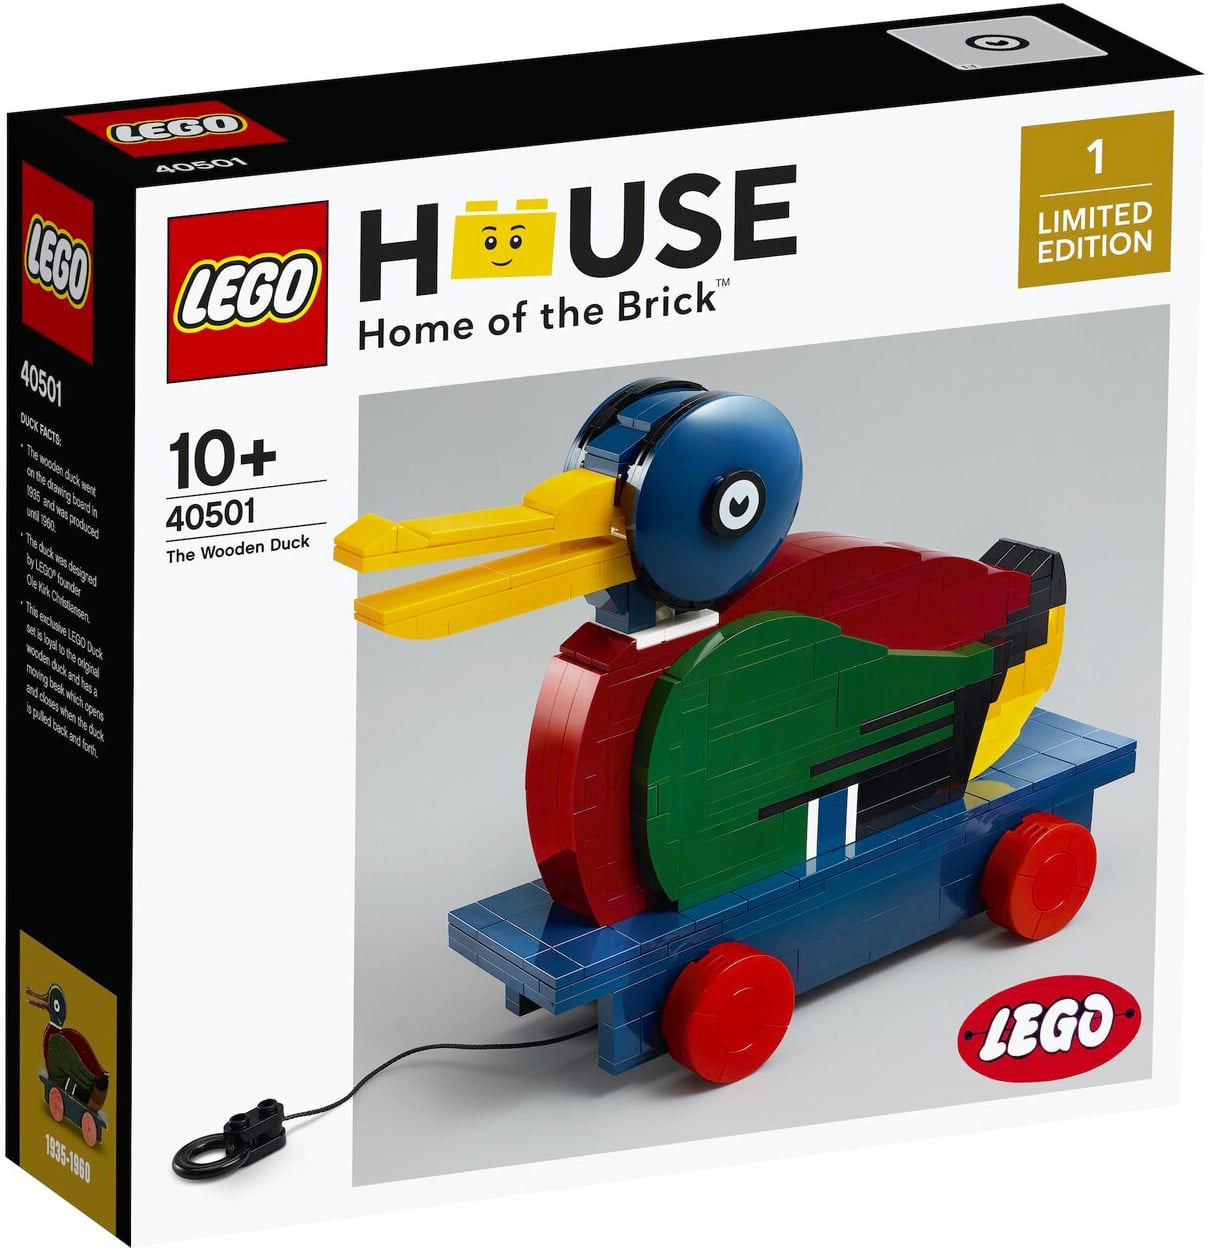 The Wooden Duck (40501)